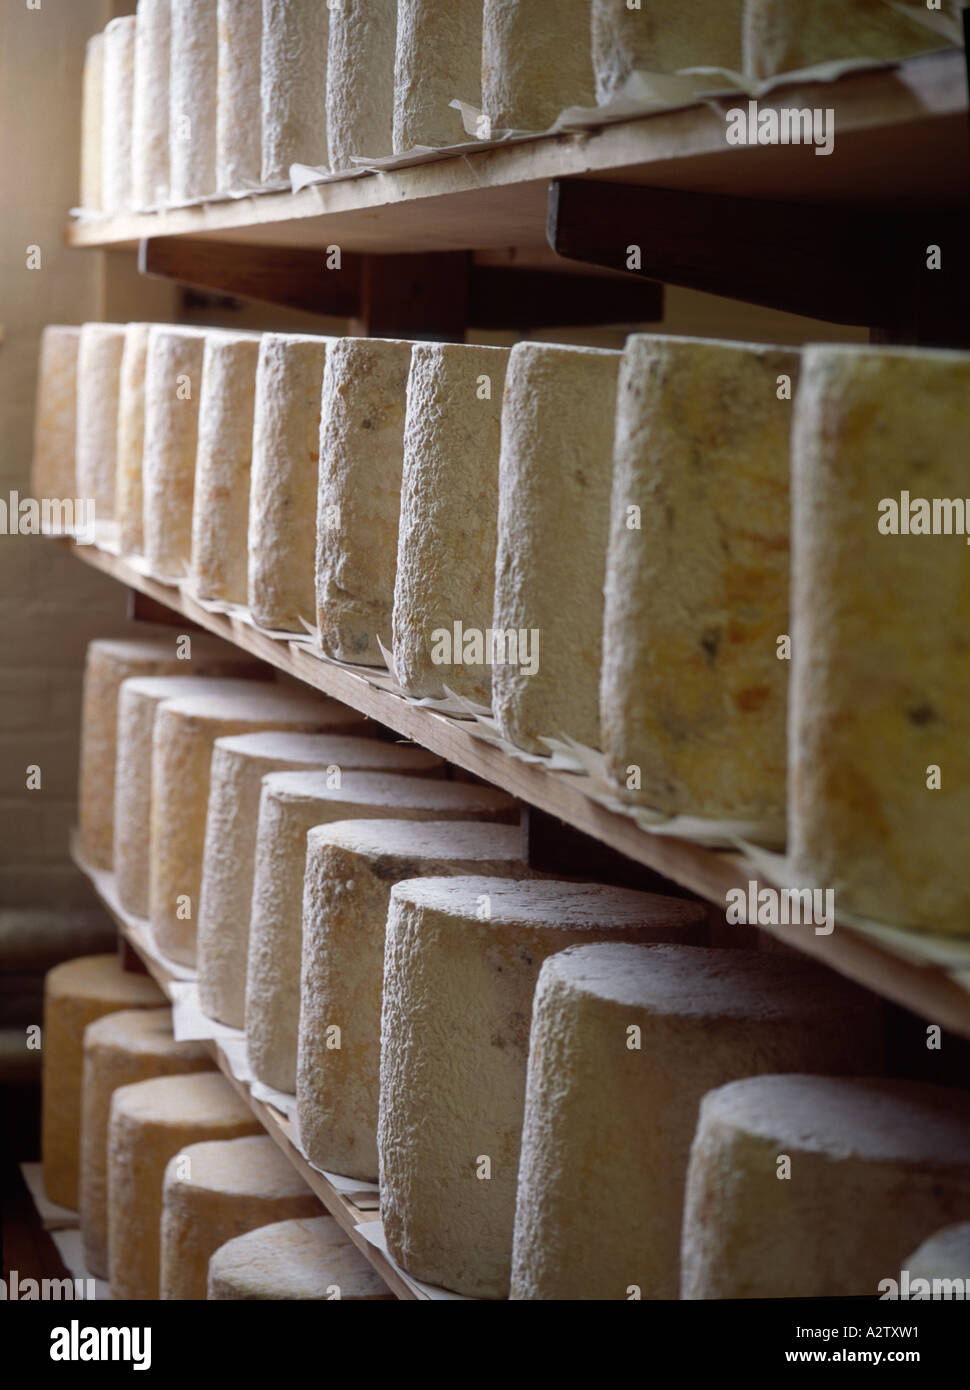 https://c8.alamy.com/comp/A2TXW1/the-rind-of-a-young-maturing-stilton-cheese-on-wooden-shelves-in-factory-A2TXW1.jpg